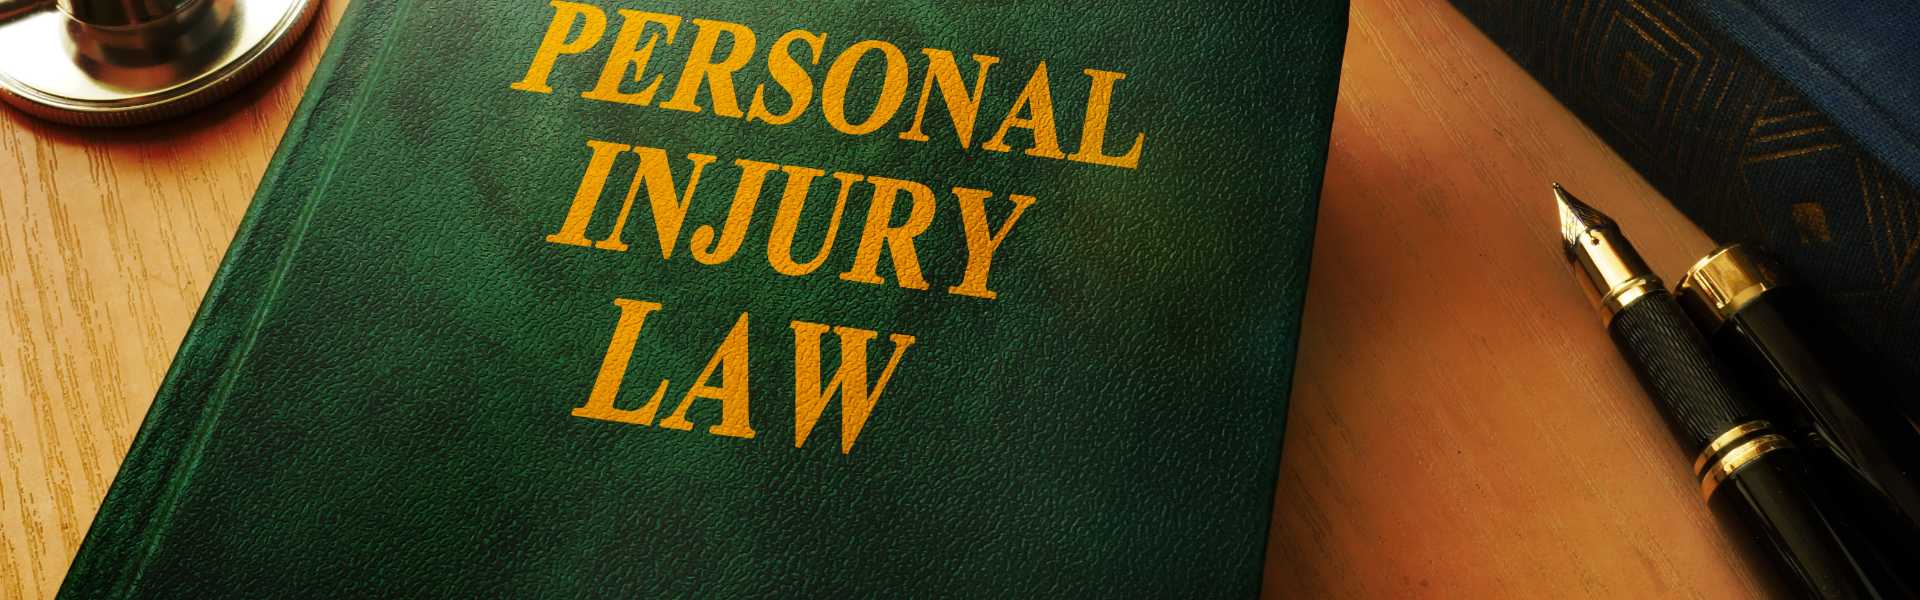 Personal injury law book on the desk of a Miami personal injury lawyer